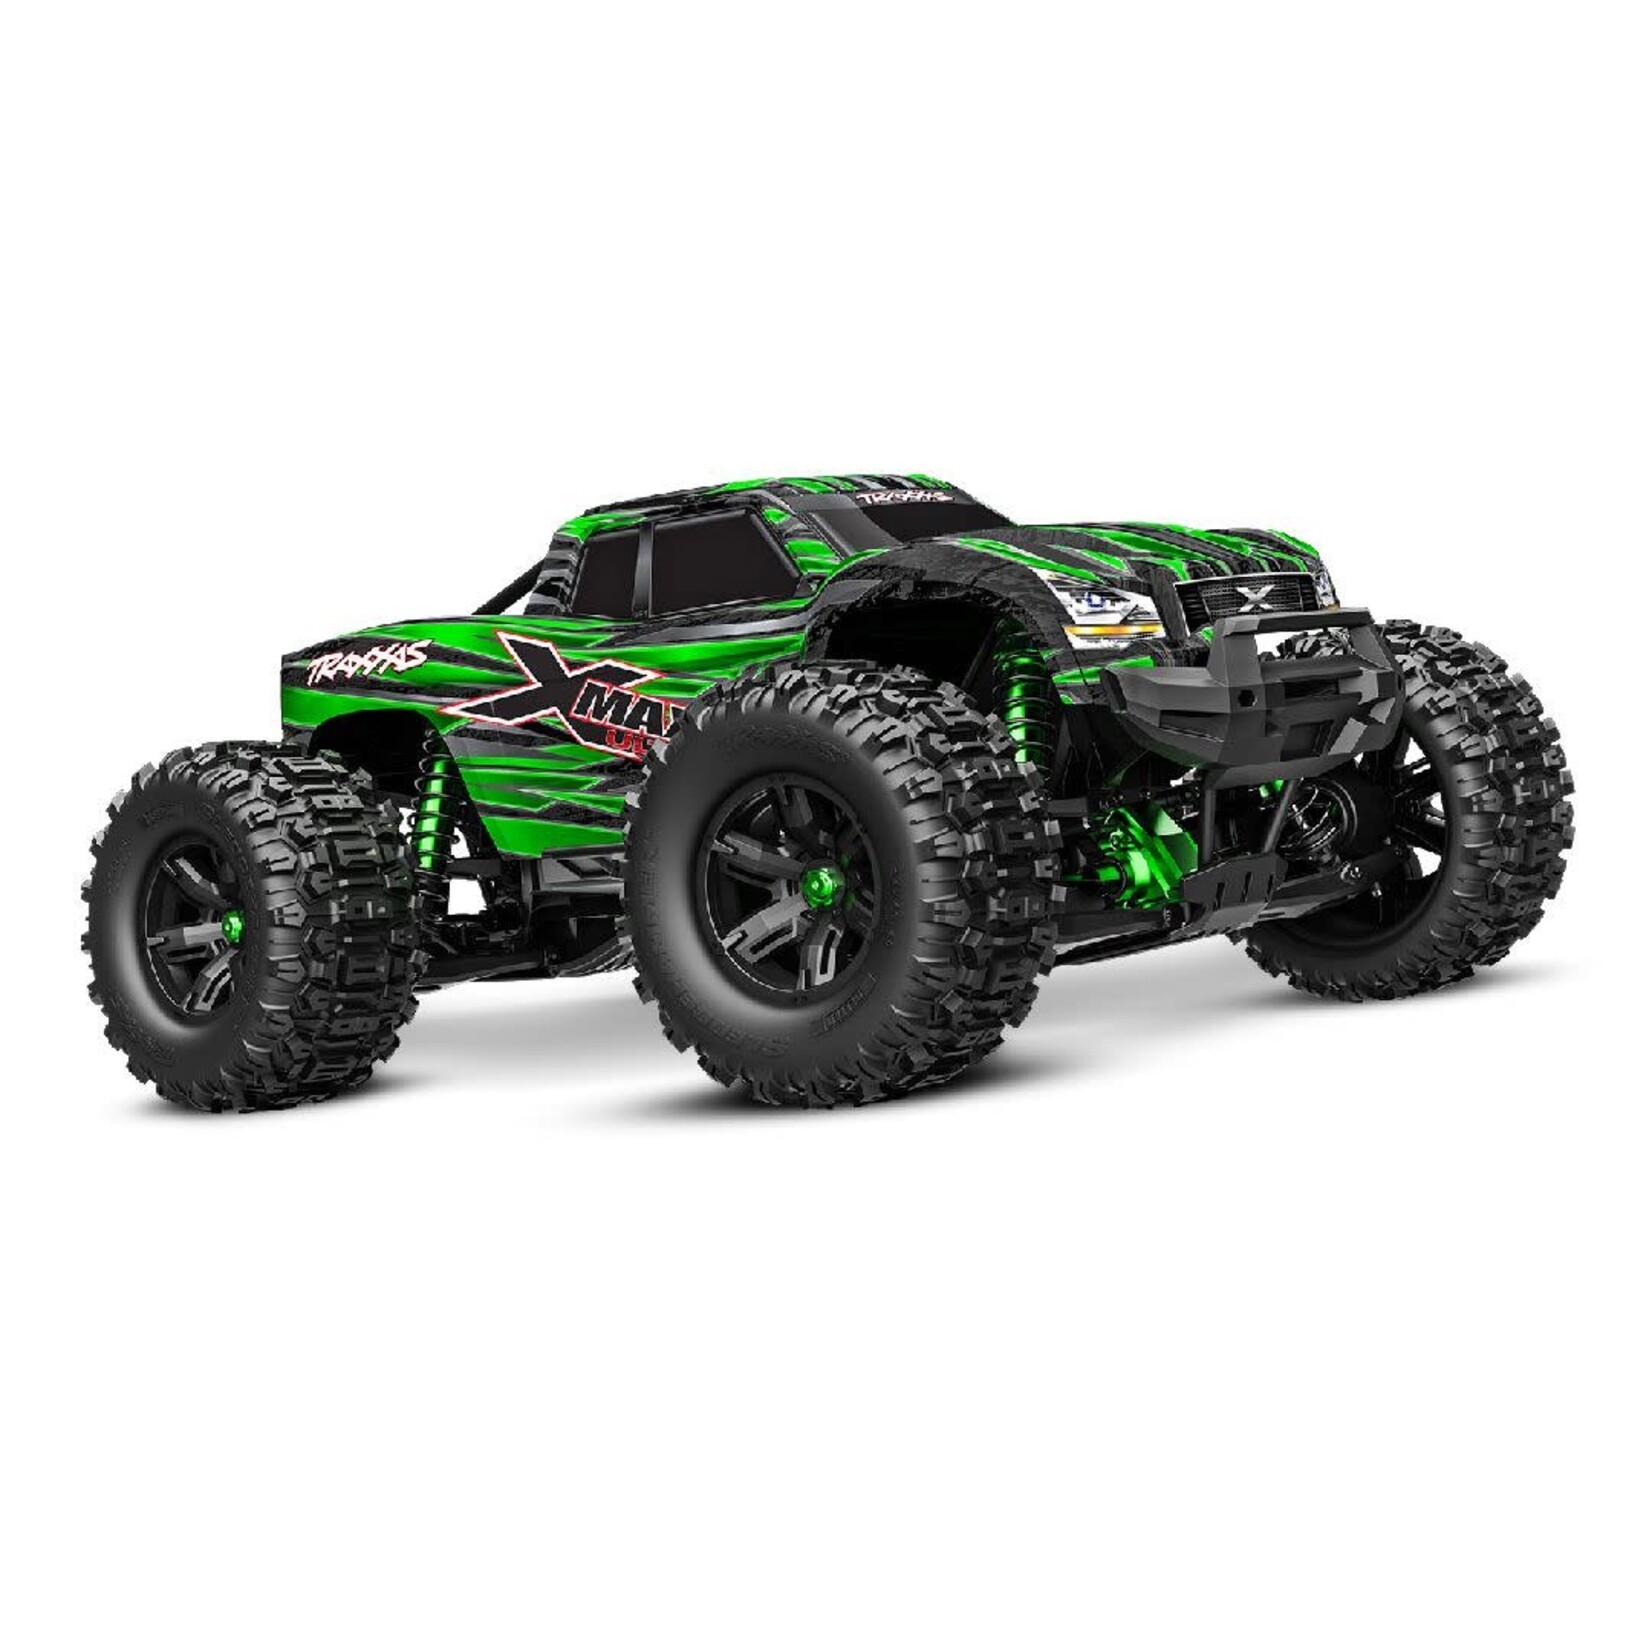 Traxxas 1/5 X-Maxx Ultimate 4WD Monster Truck Requires Batter and Charge - Green